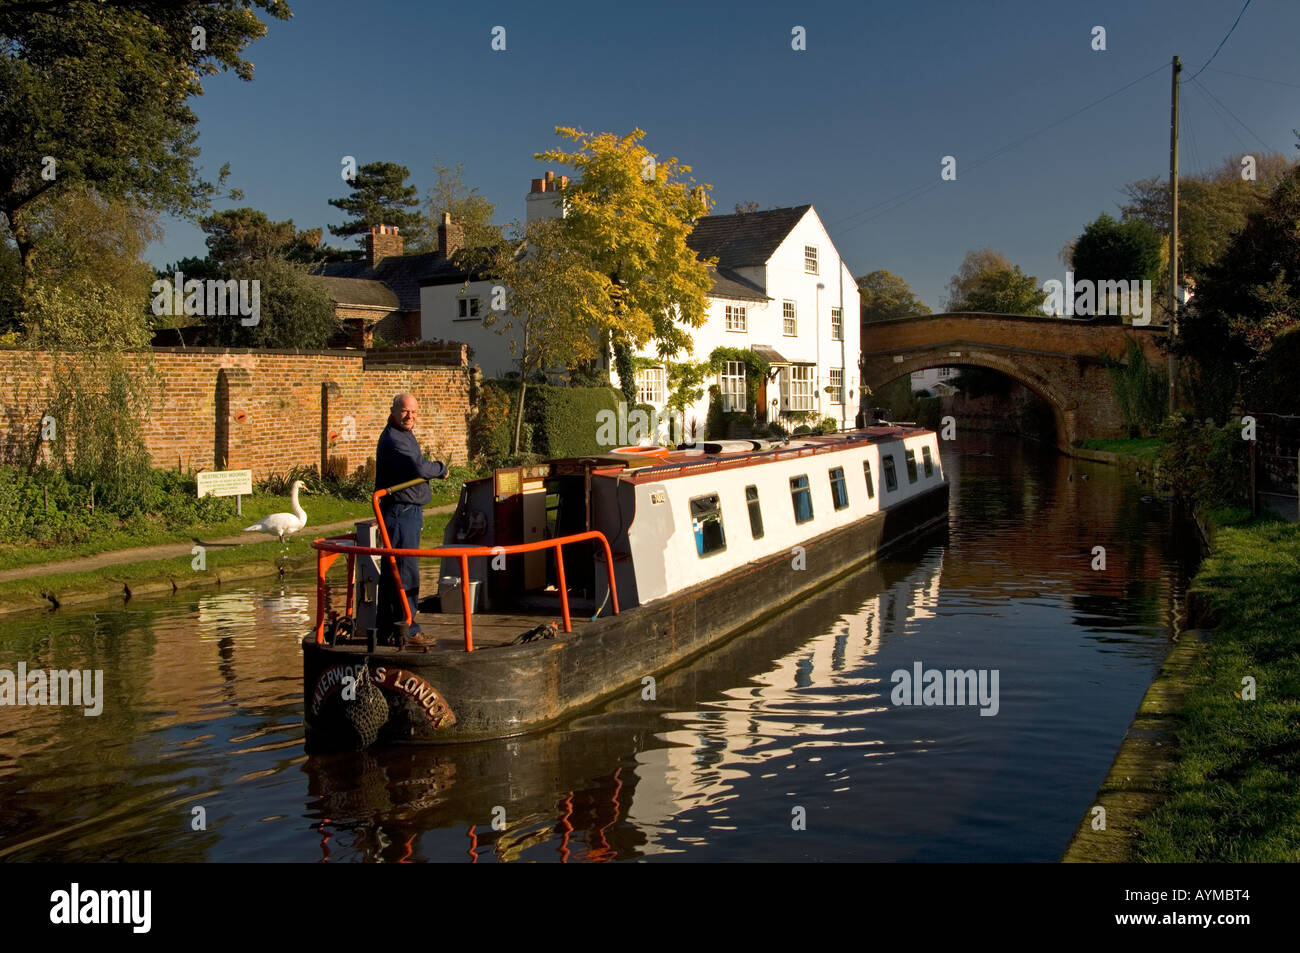 Canal Boat Passing Bridgewater House Reflected in the Bridgewater Canal, Lymm, Cheshire, England, UK Stock Photo